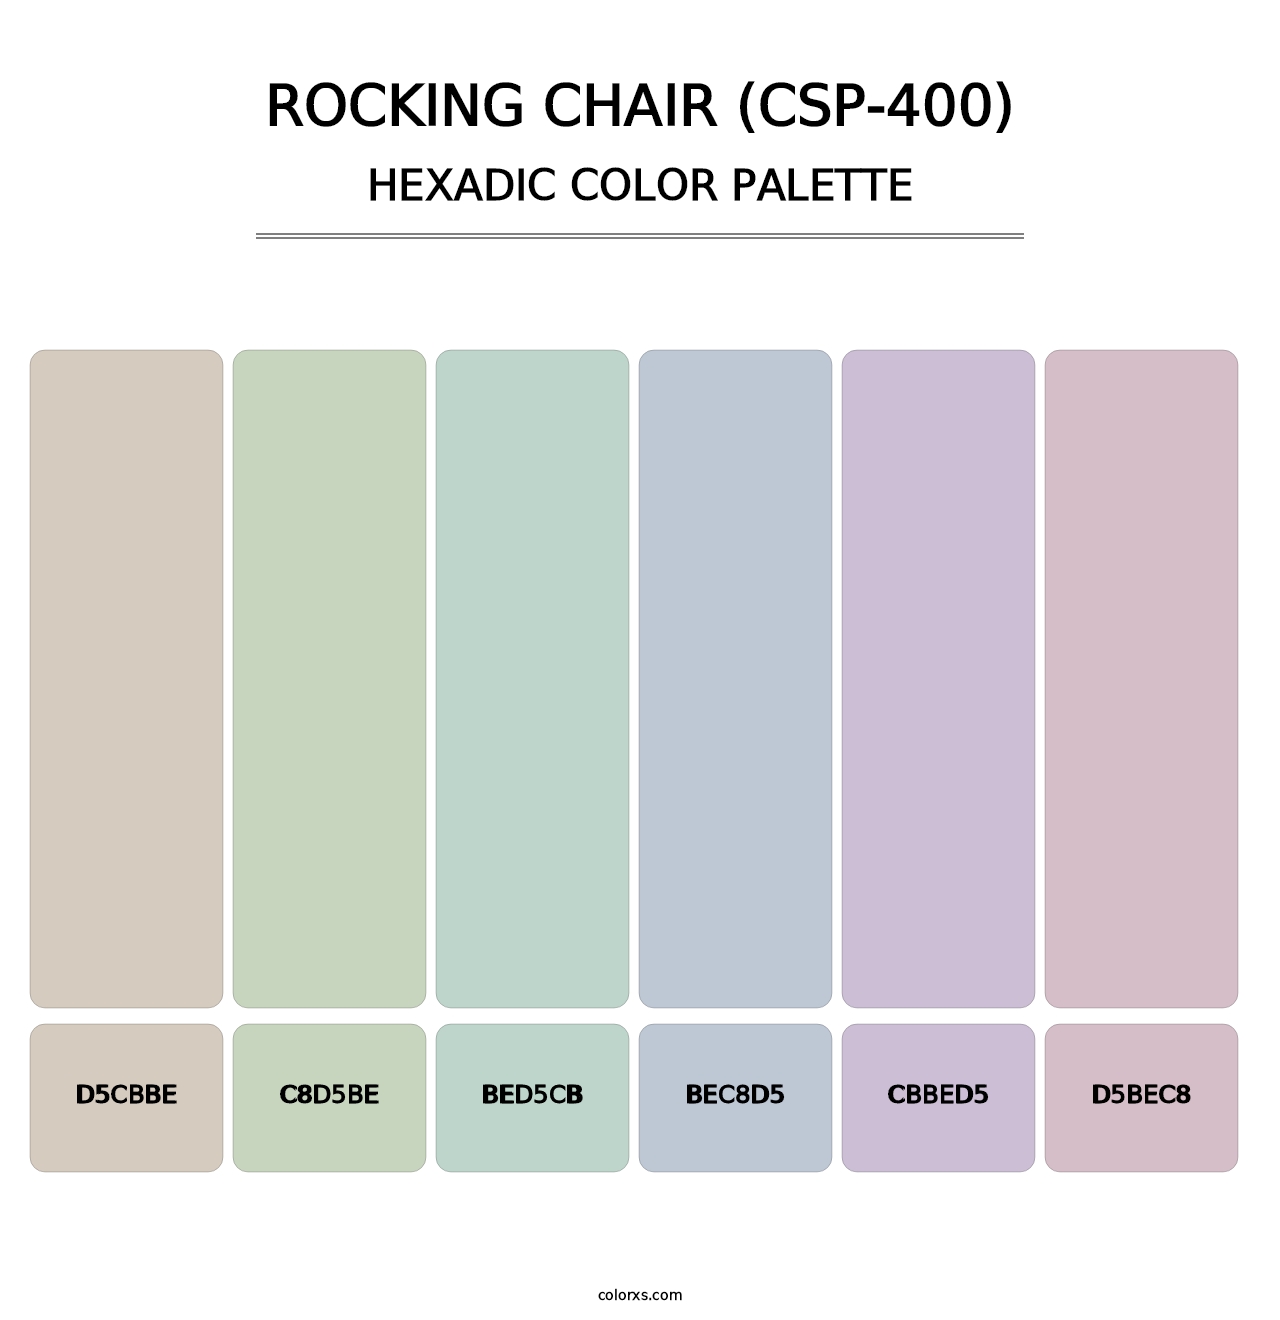 Rocking Chair (CSP-400) - Hexadic Color Palette